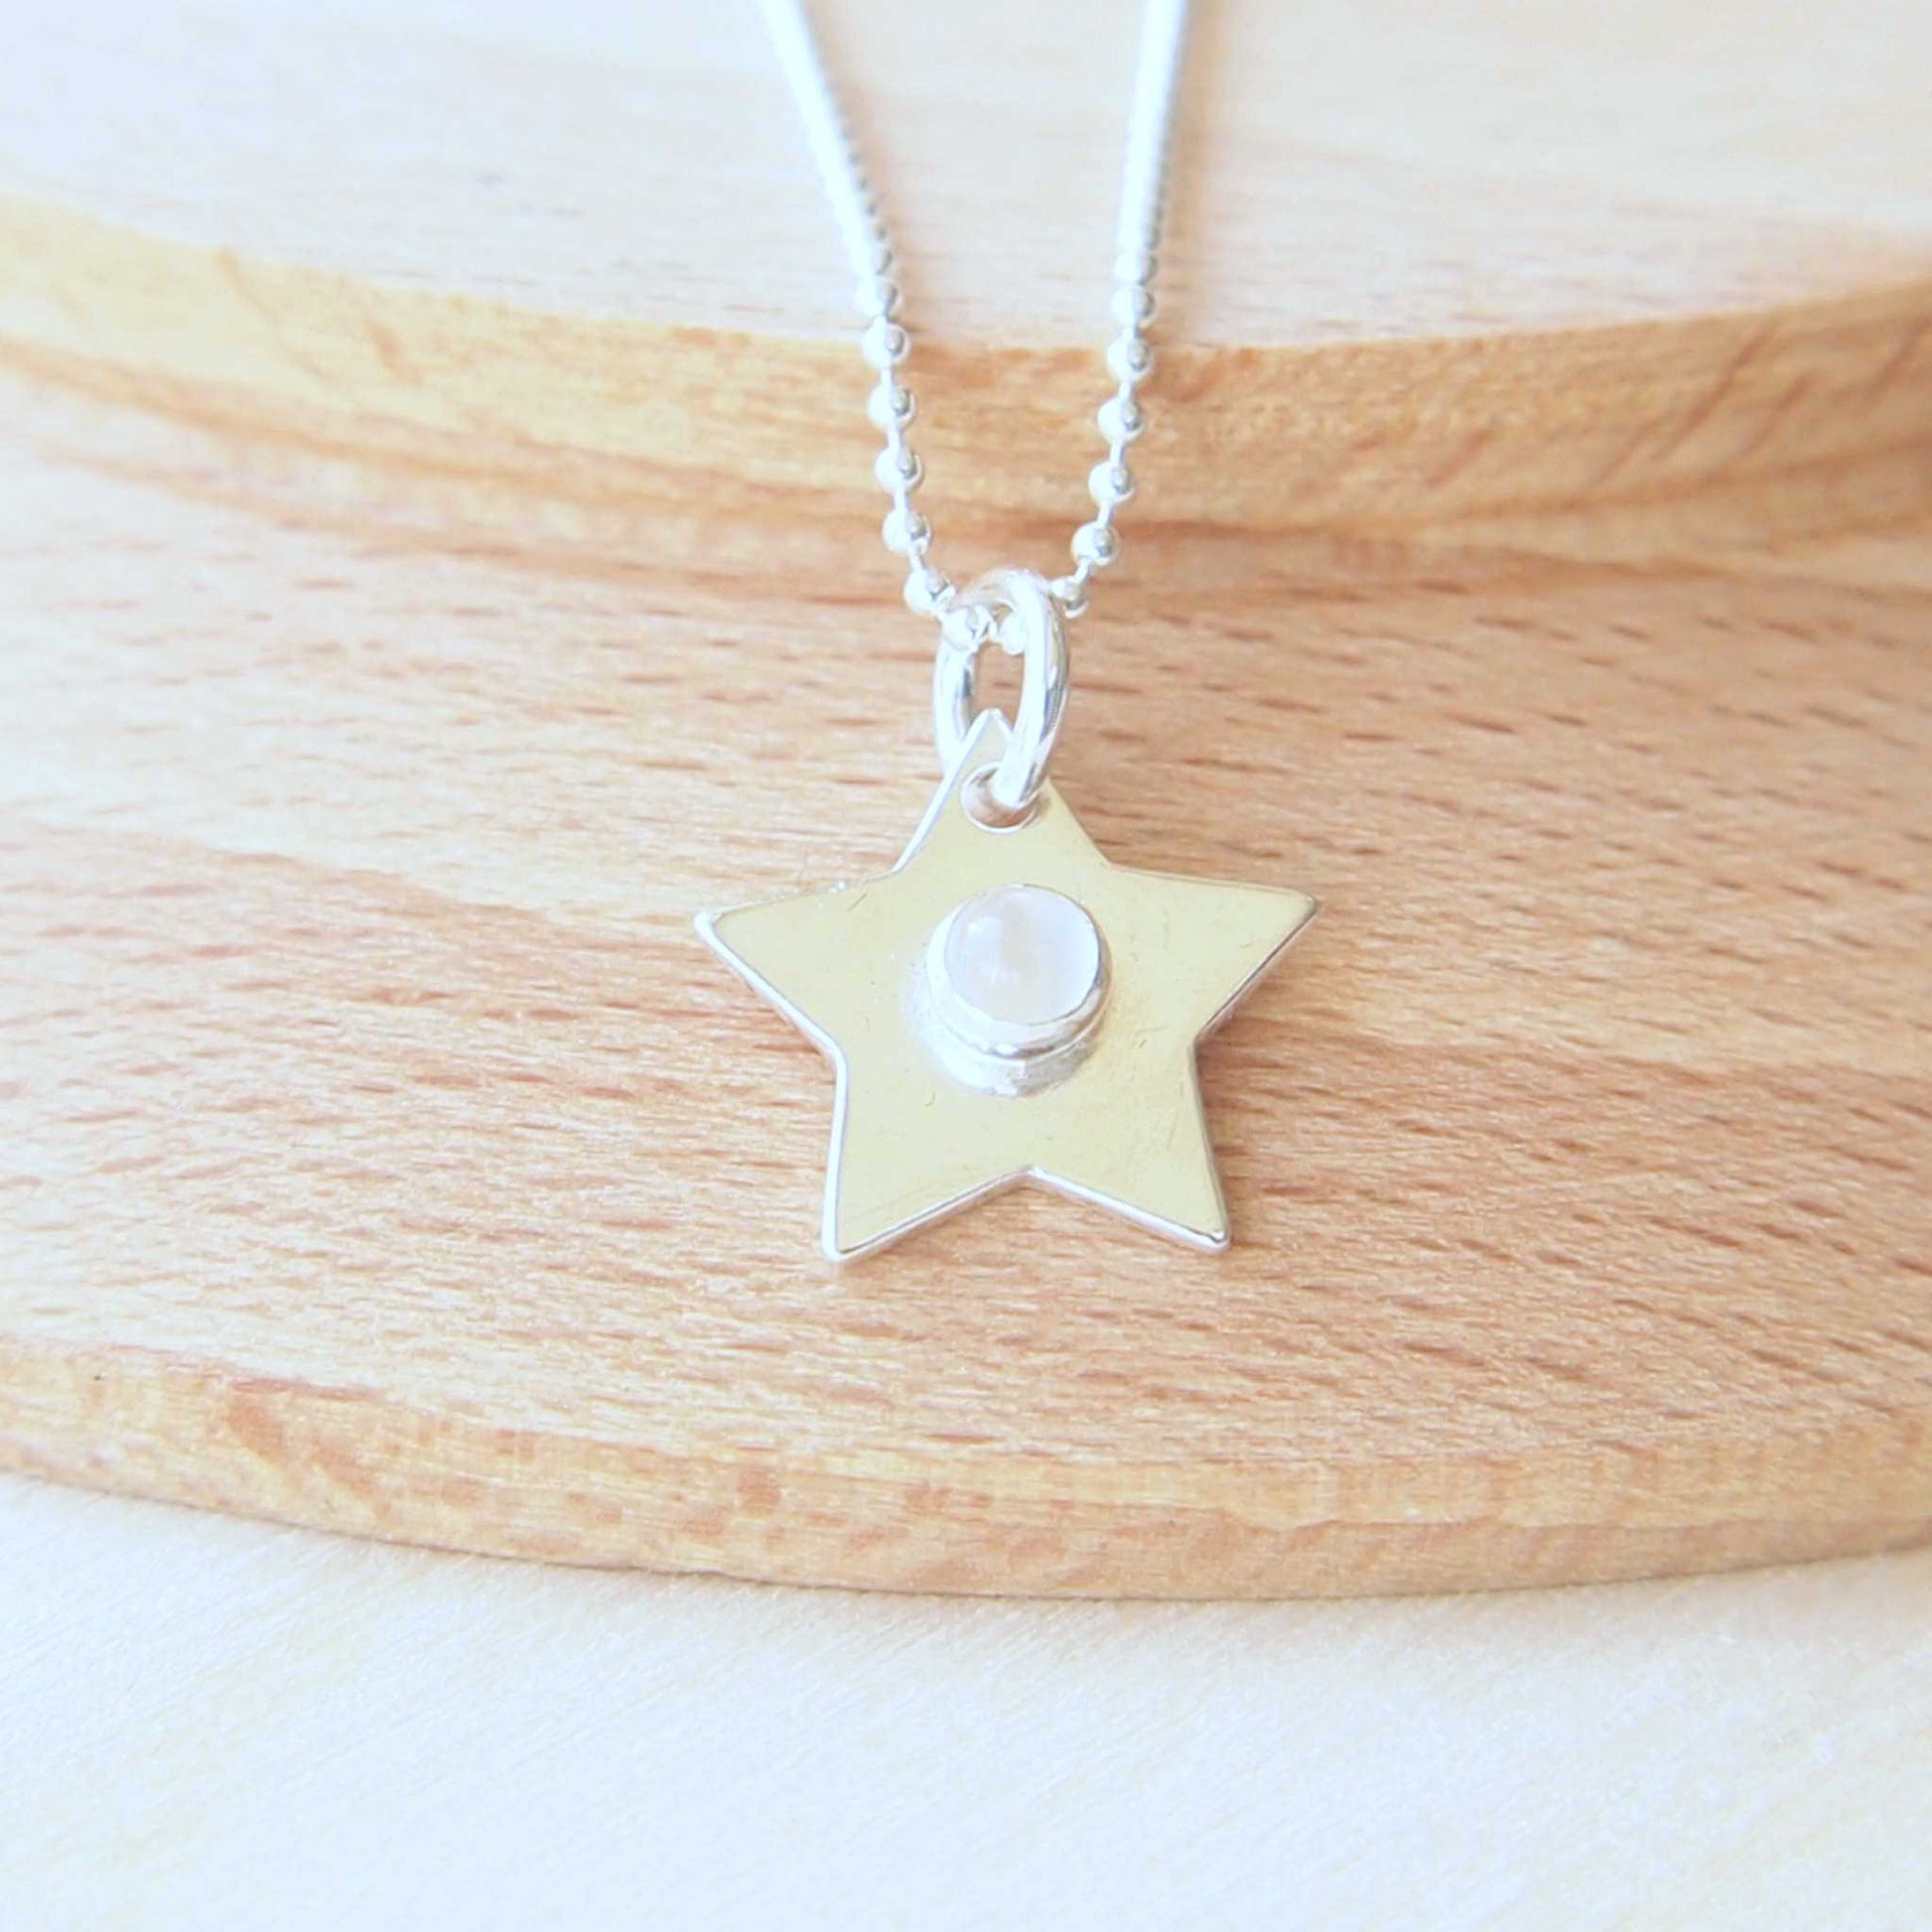 Silver Moonstone Star pendant on a chain with June's Birthstone. Small Silver Star for all ages and simple in design. Handmade by a small jeweller in Edinburgh UK